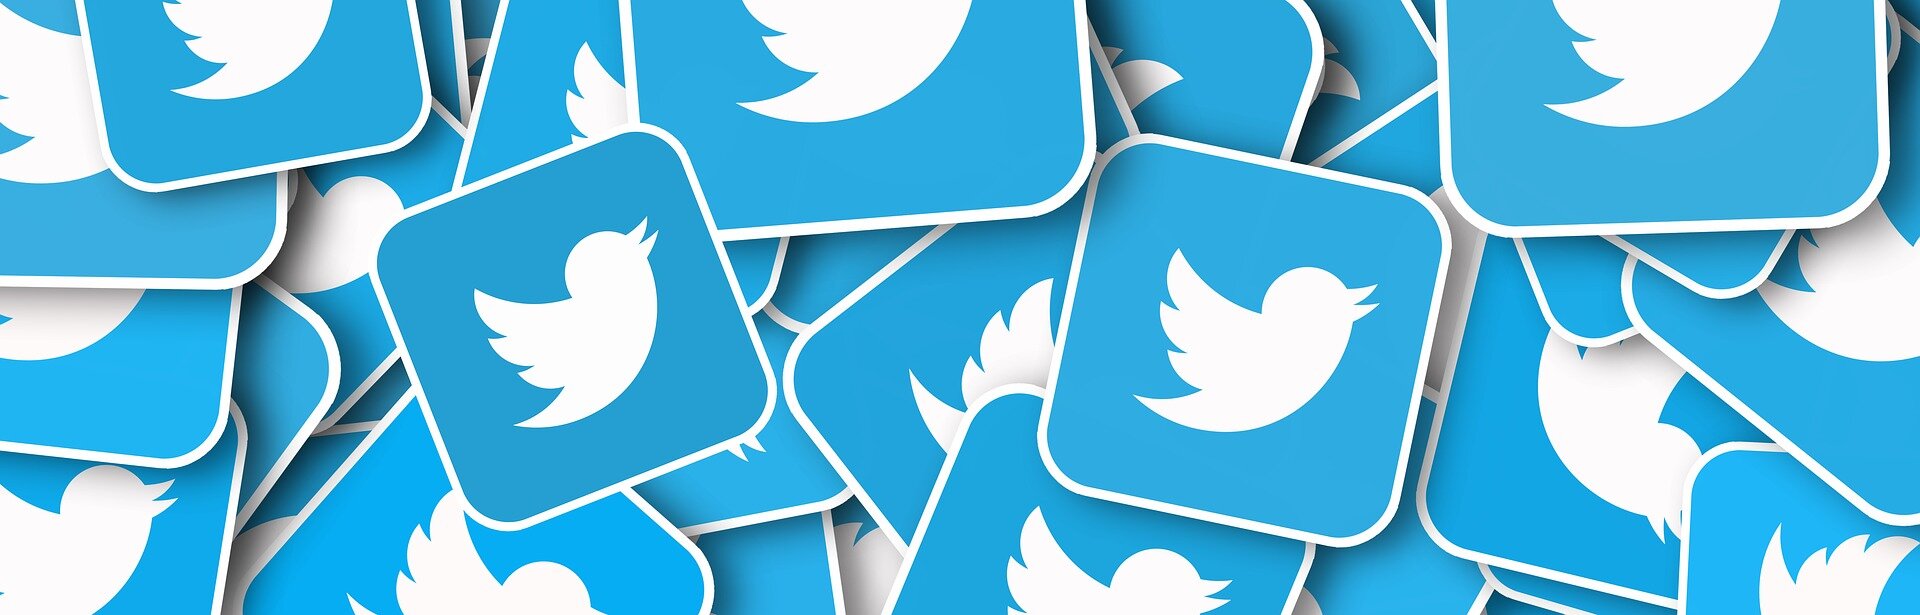 #Black Twitter shaped the platform, but its future lies elsewhere